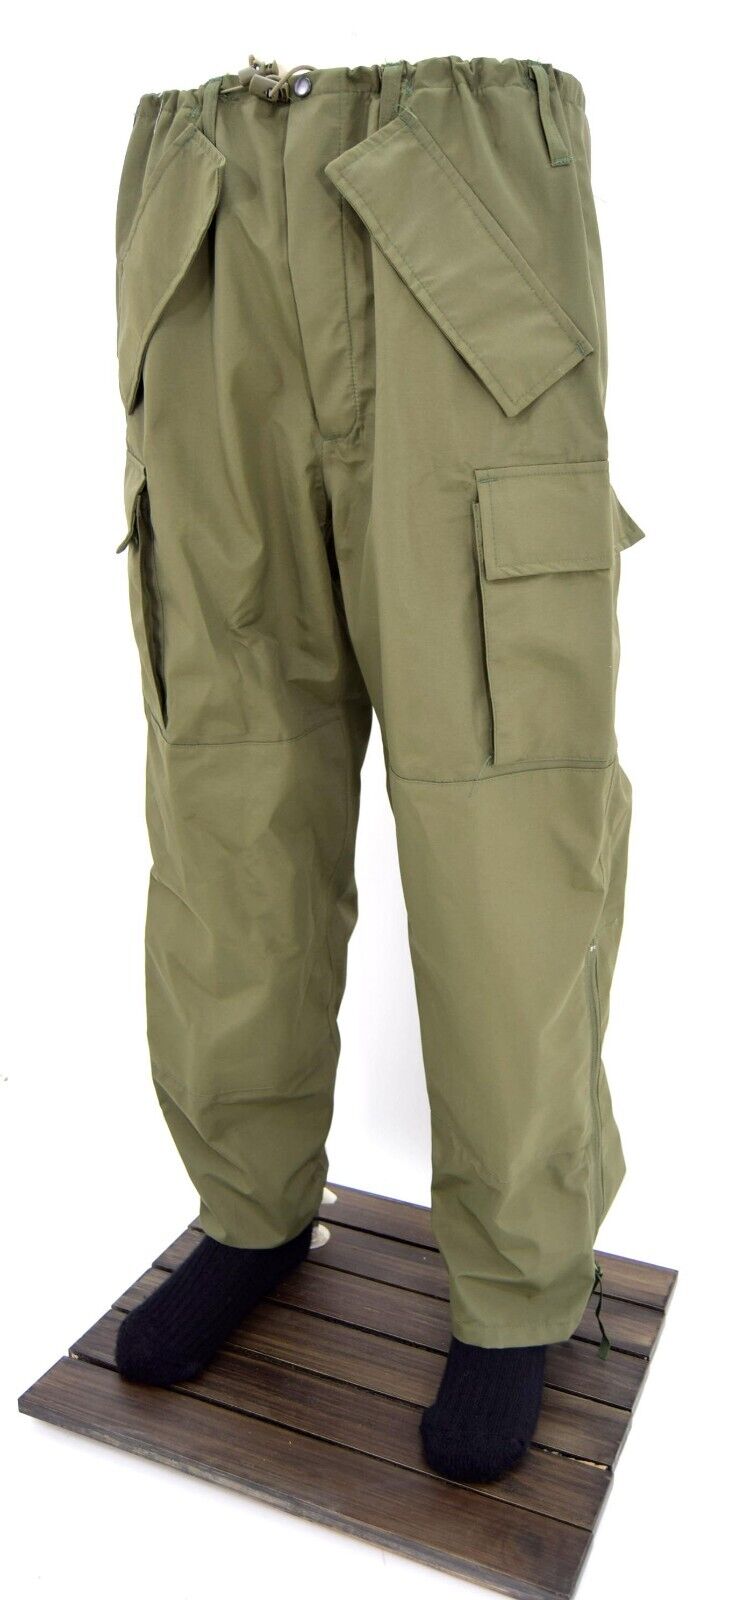 Army Wet Weather Goretex Over Trousers Waterproof Combat Pants Trouser Military